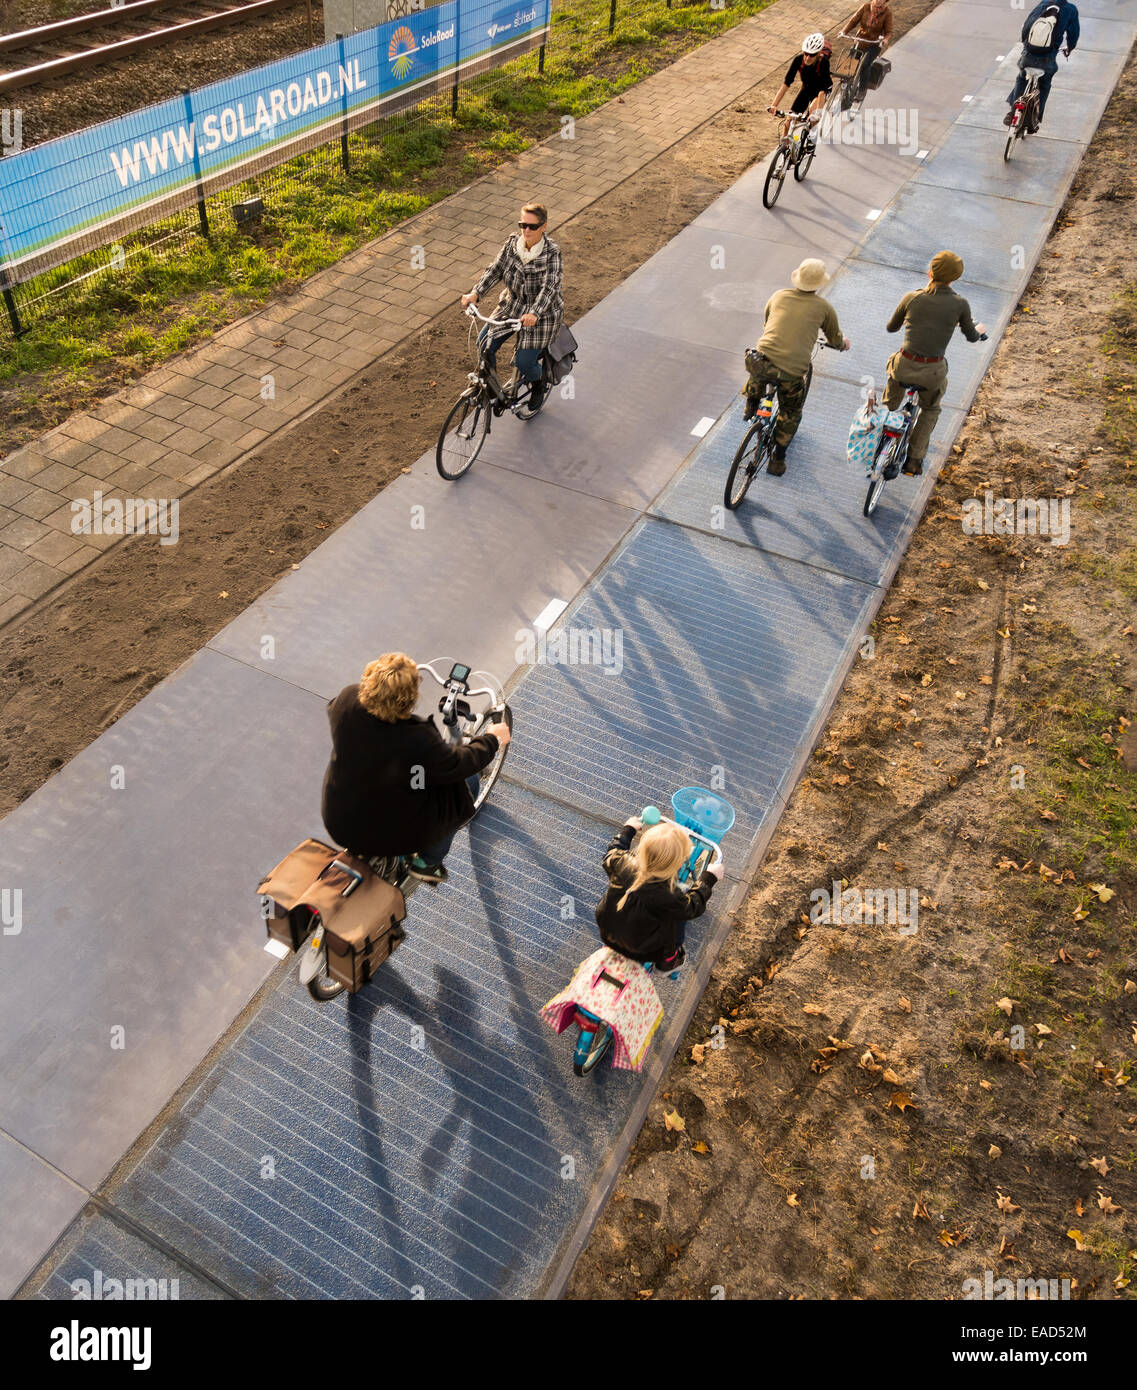 Krommenie, Netherlands. 12th November, 2014. File photo: November 1st 2014. World's first cycle lane made from solar cells with cyclists on busy bike path. Initially only 70 meters (230ft) long. Installed October 2014 in Krommenie, 25 km (15 miles) north of Amsterdam. Made from concrete slabs of 2.5 by 3.5 meters ( 6.5x10ft) with a translucent top layer of tempered glass, which is about 1cm thick. Underneath the glass are crystalline silicon solar cells. The initial stretch is capable of producing enough energy to power three homes. Credit:  Wiskerke/Alamy Live News Stock Photo